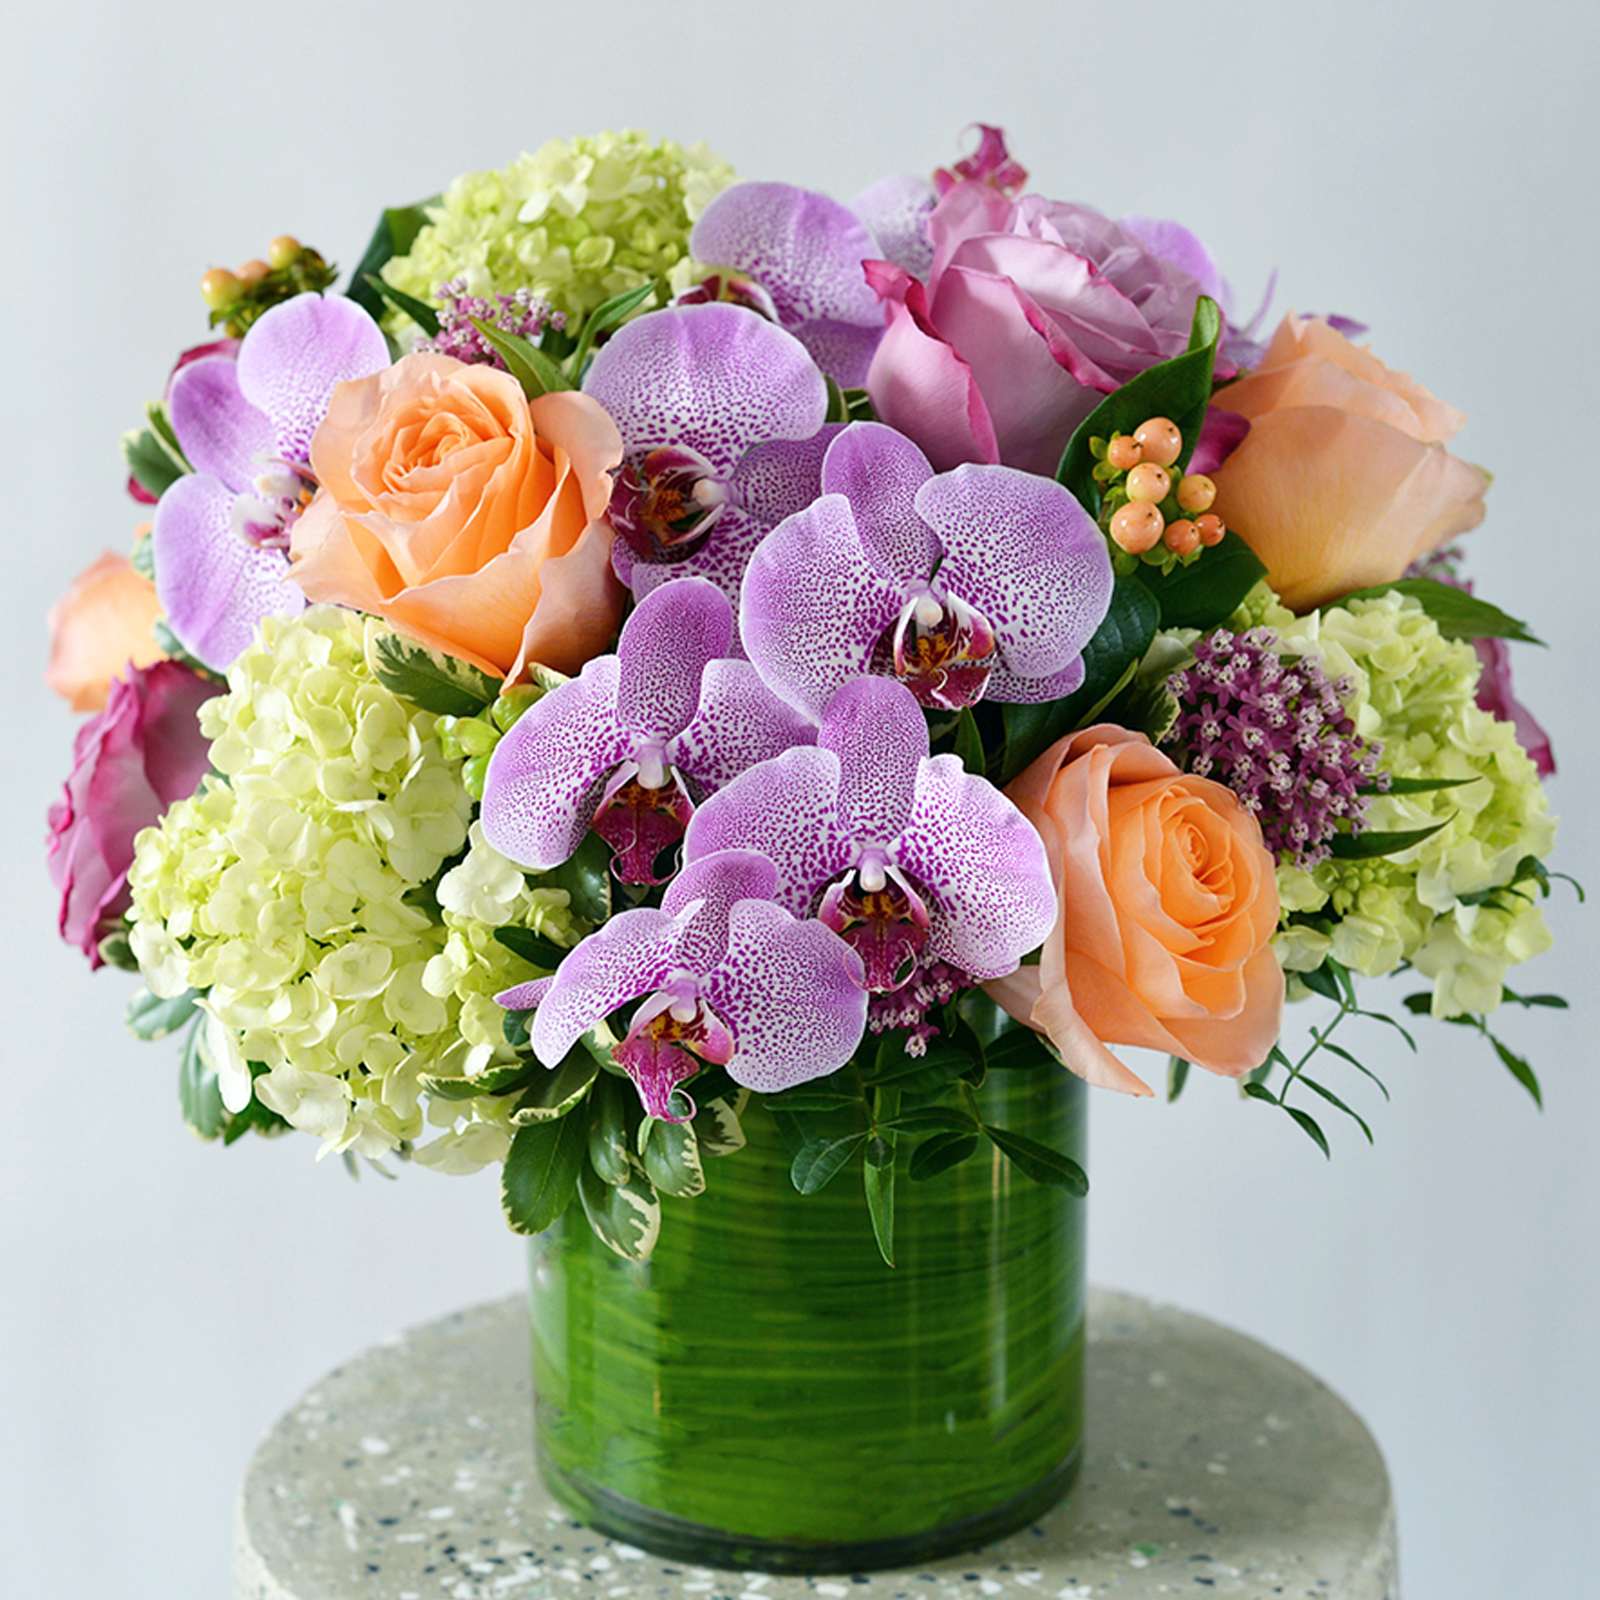 Radiant Joy Bouquet - Brimming with soft hues and gentle tones, this bouquet captures the essence of serenity with pastel-colored roses, carnations, and hydrangeas. Arranged delicately in a graceful glass vase, it offers a tranquil and elegant touch to any space.